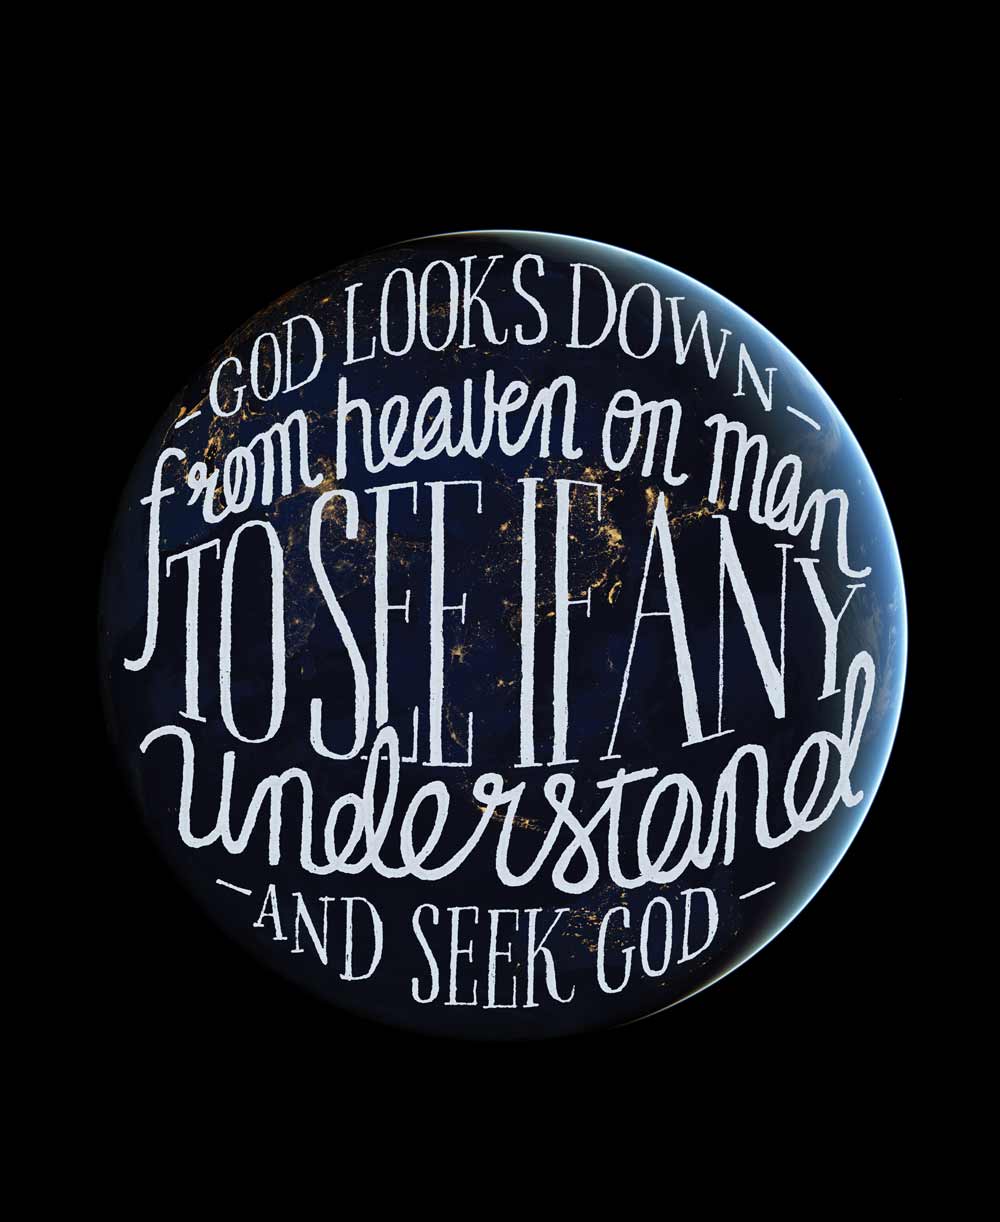 Psalm 53 hand lettering: God looks down from heaven on men to see if any understand and seek God. Lettering overlaid on a photo of earth